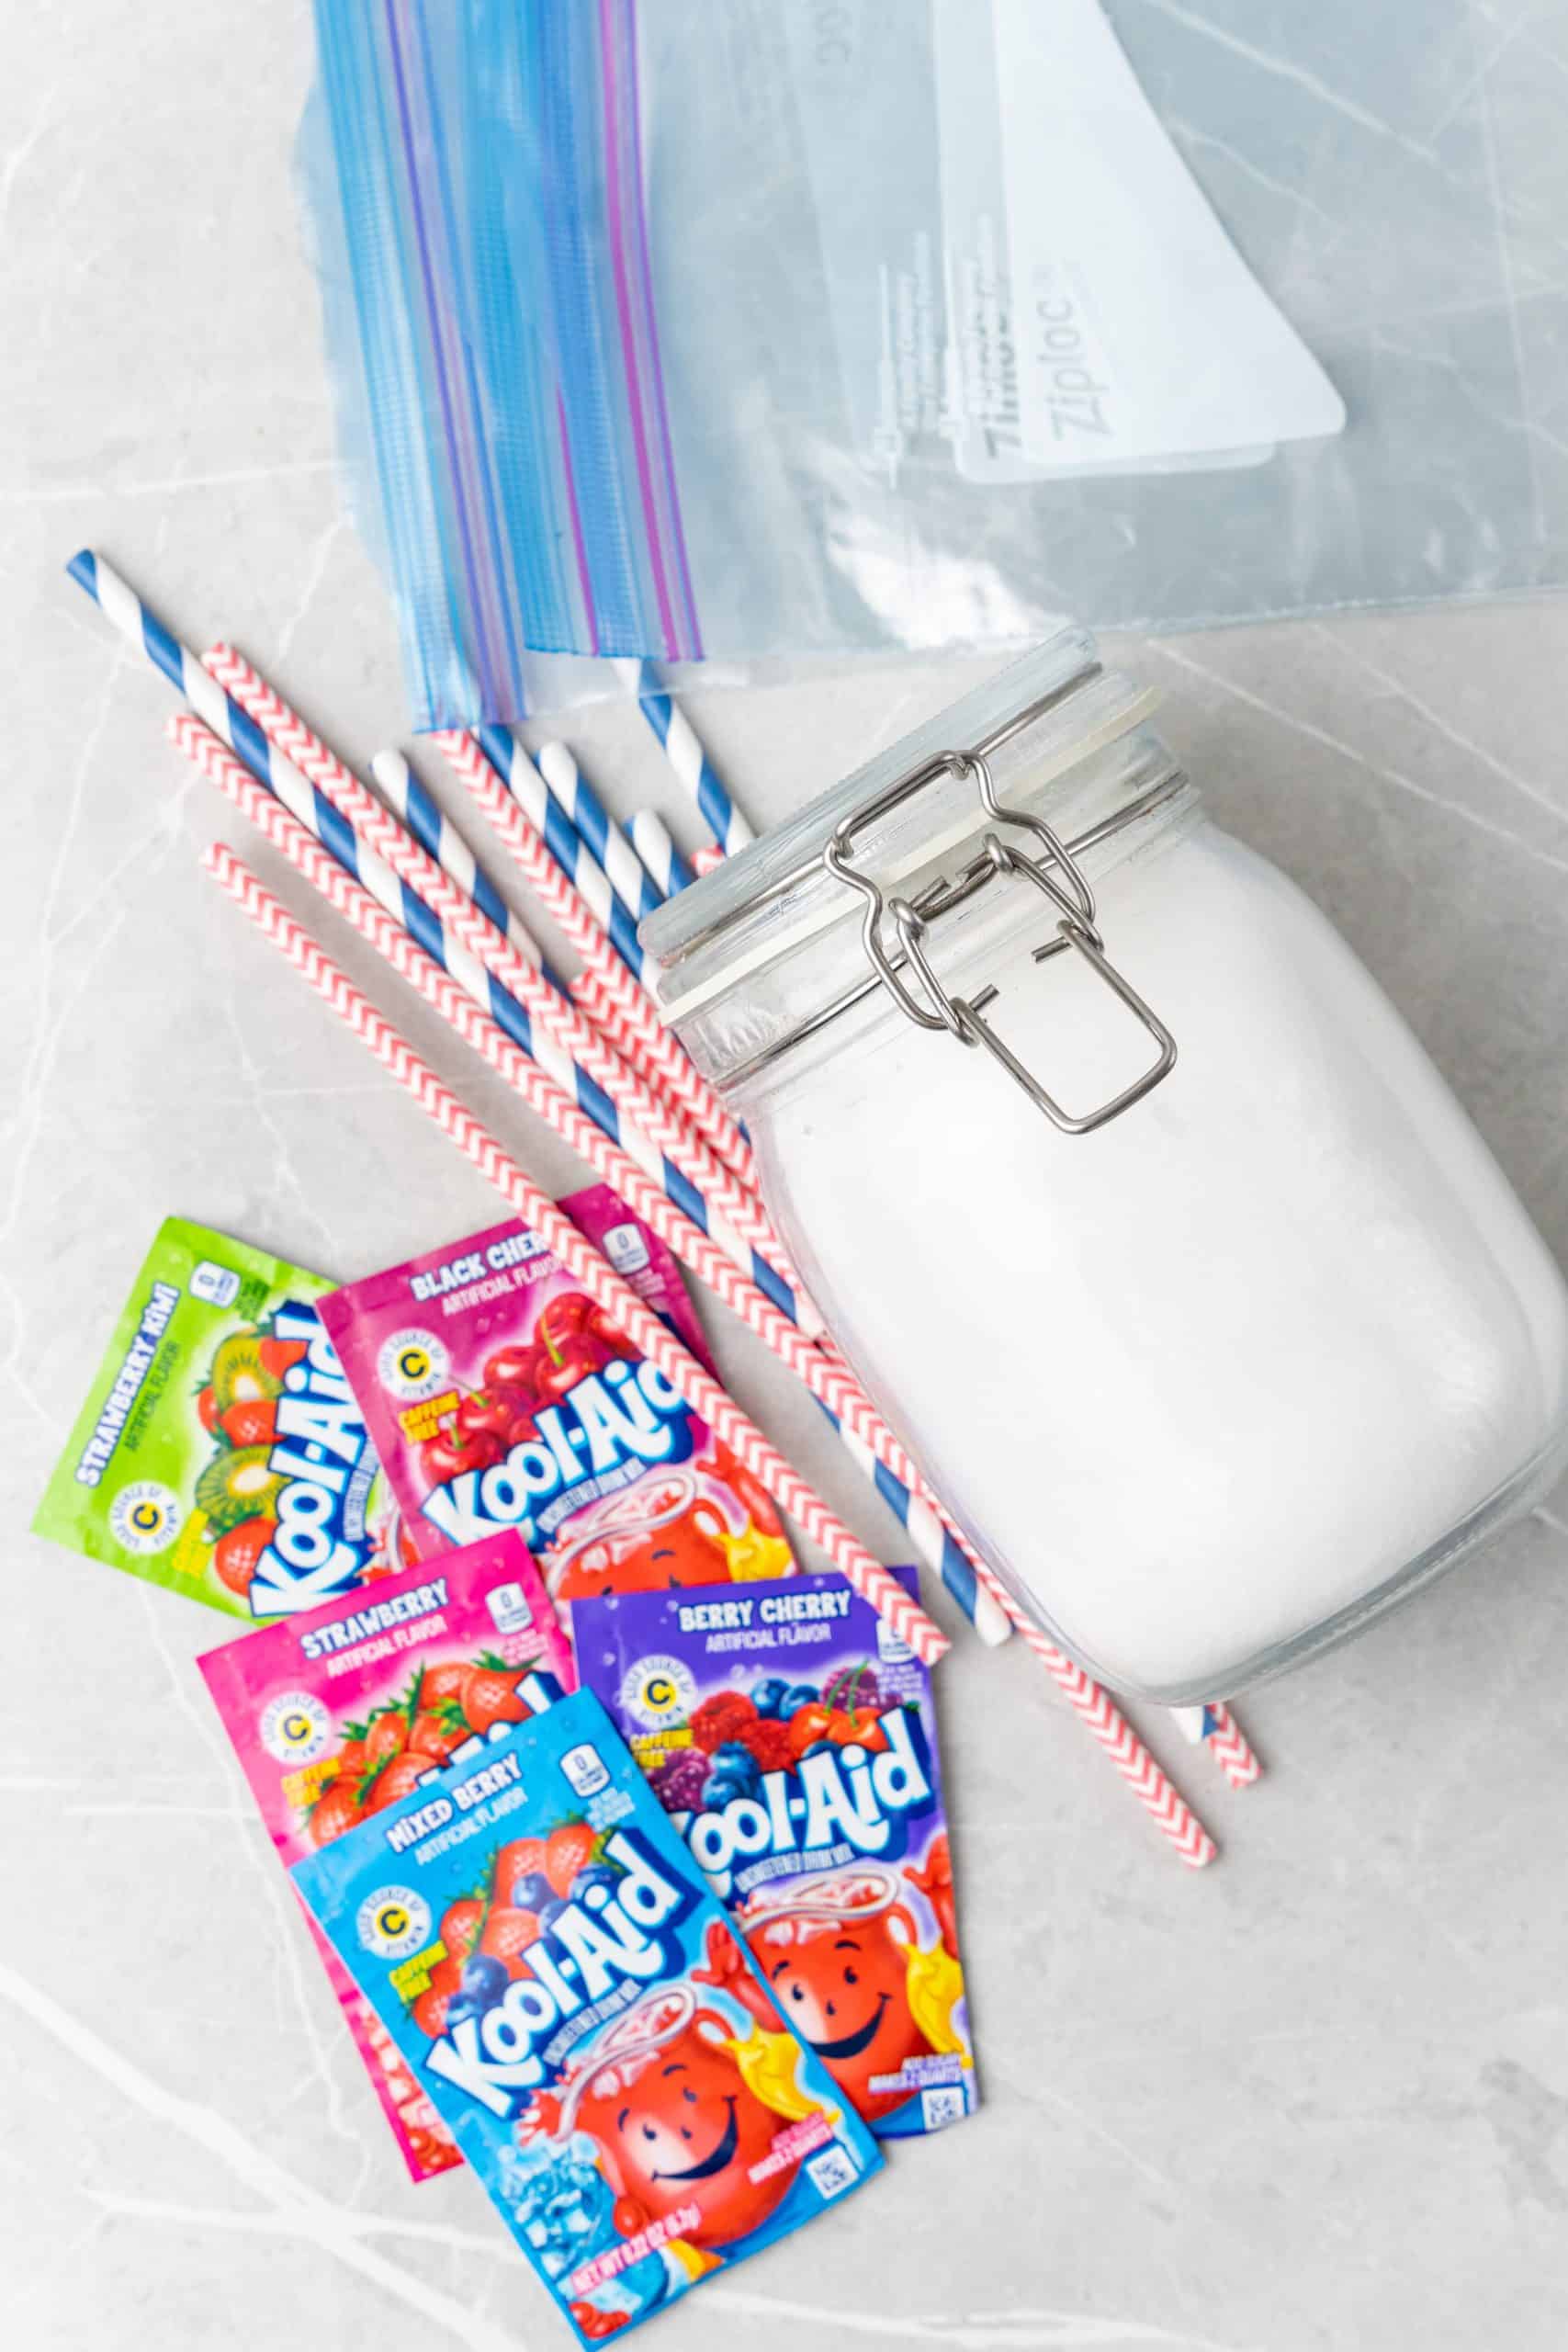 an overhead image showing the ingredients needed to make a batch of homemade pixie sticks